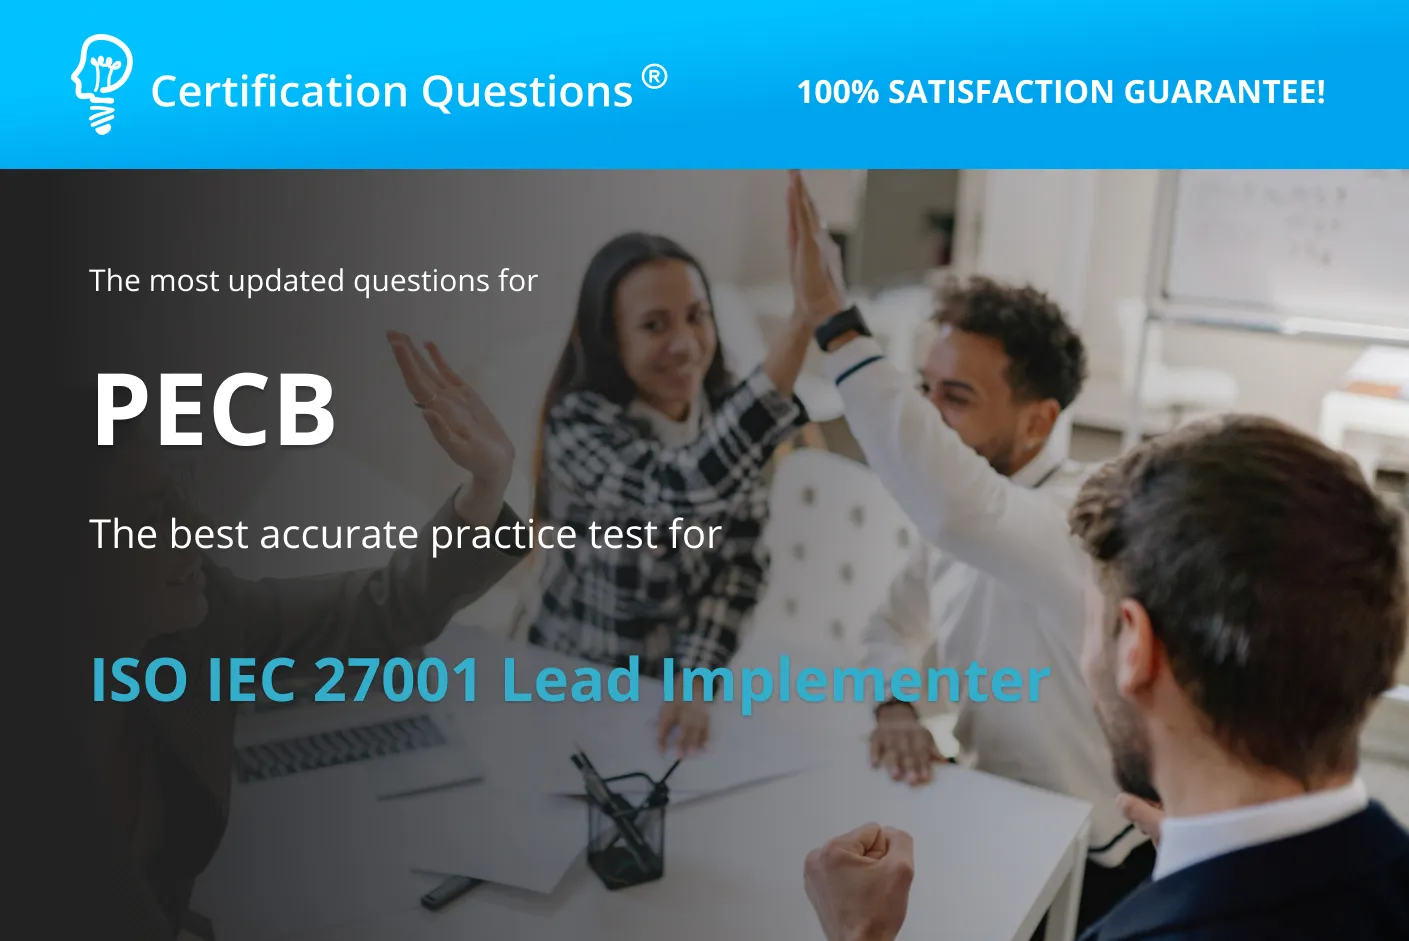 This is the guide of ISO IEC-27001 Lead Implementer certification